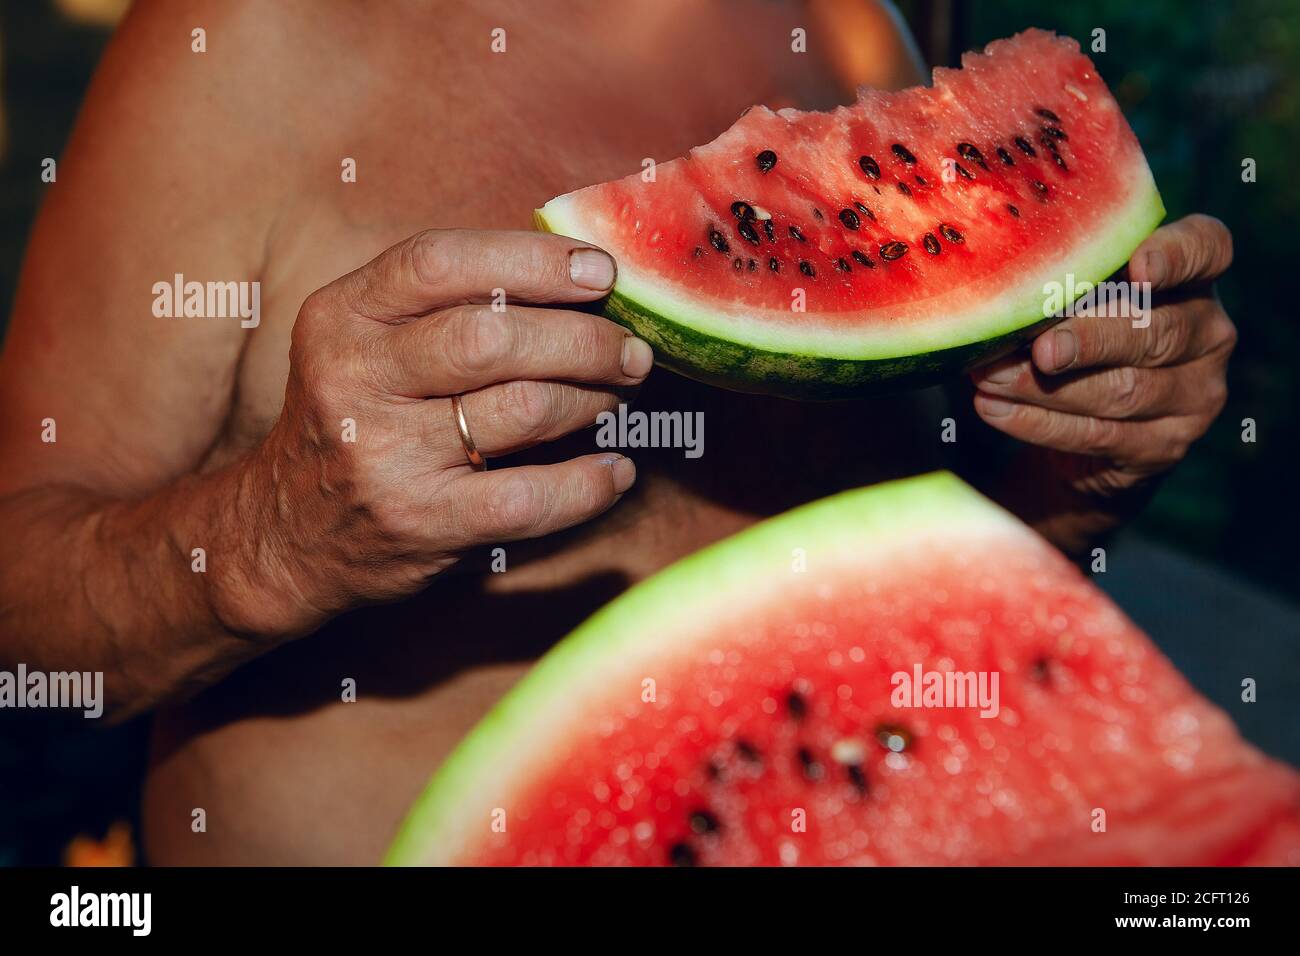 Man eating watermelon . Farmer holding watermelon in the hans ready to eat Stock Photo